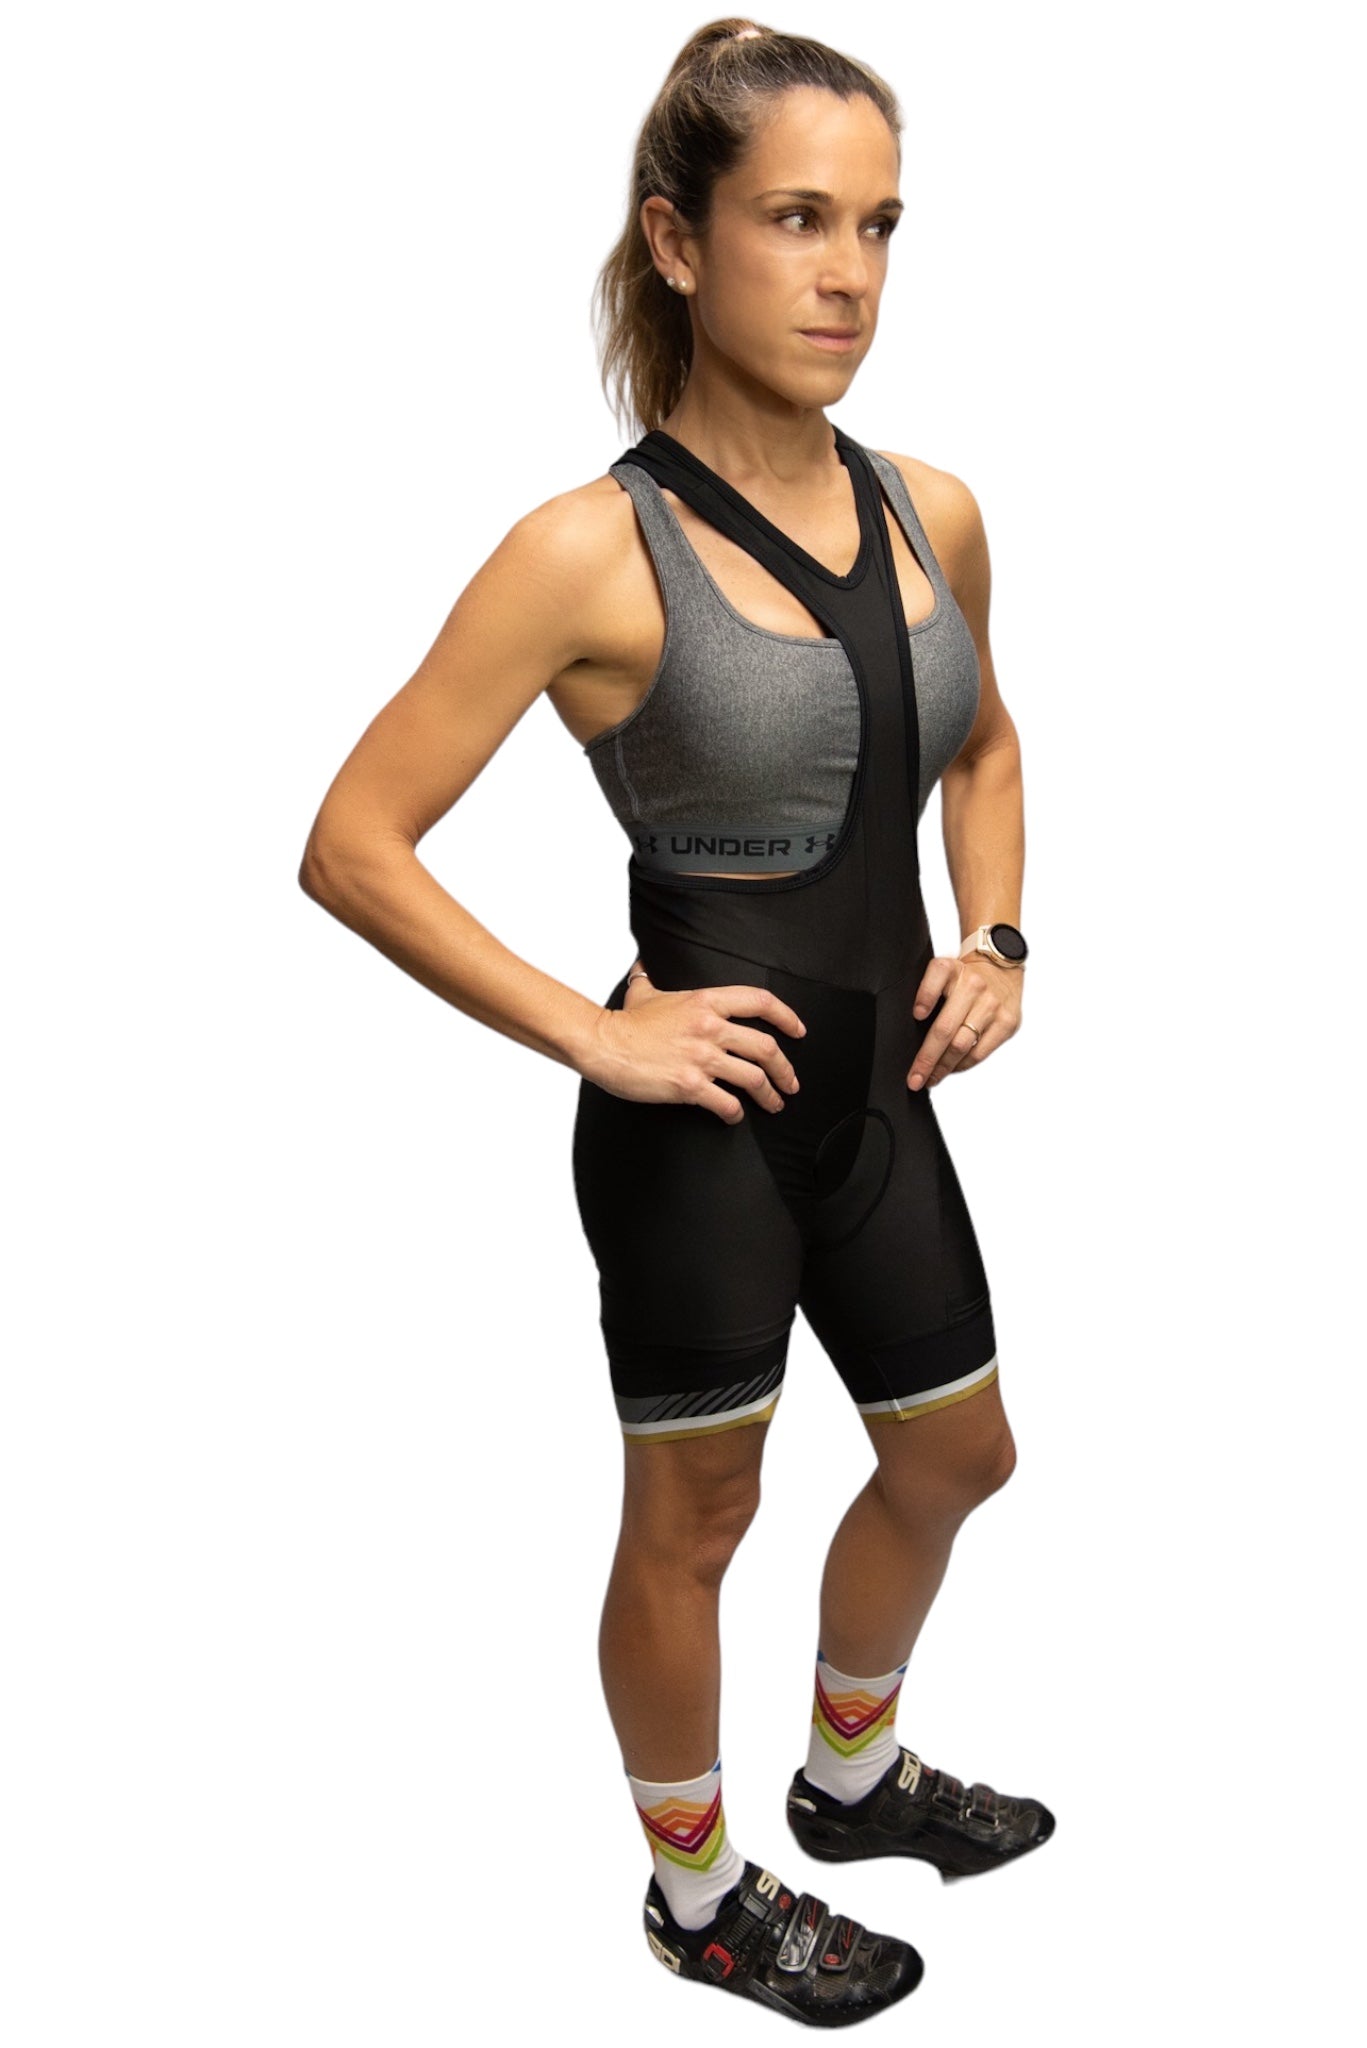 Womens Bibs and Speed Suits